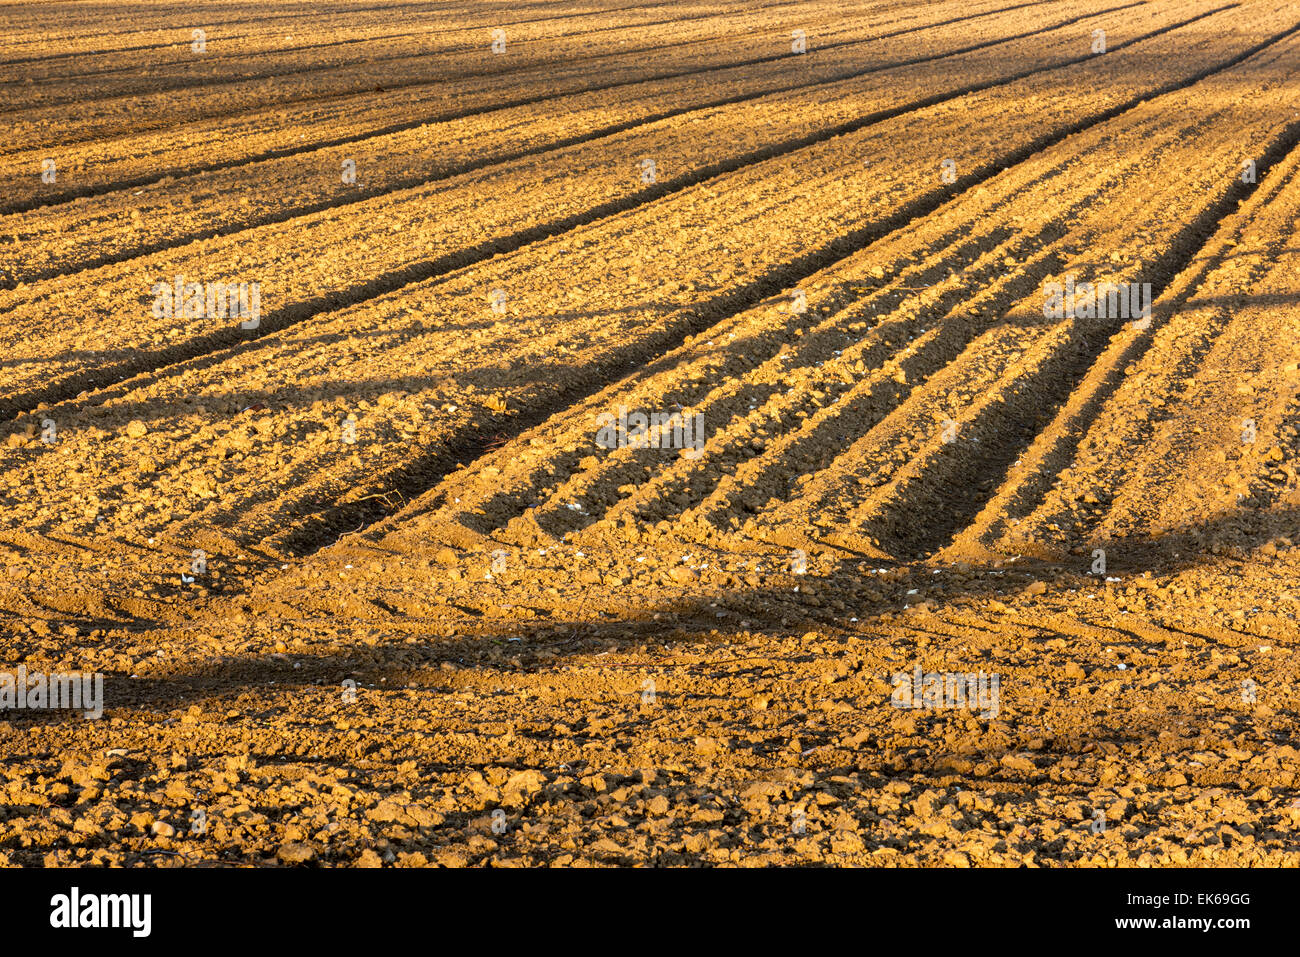 early spring field furrows field sowing Natureart new beginning brown earth bavaria europe Germany farmers Farm Agriculture patt Stock Photo